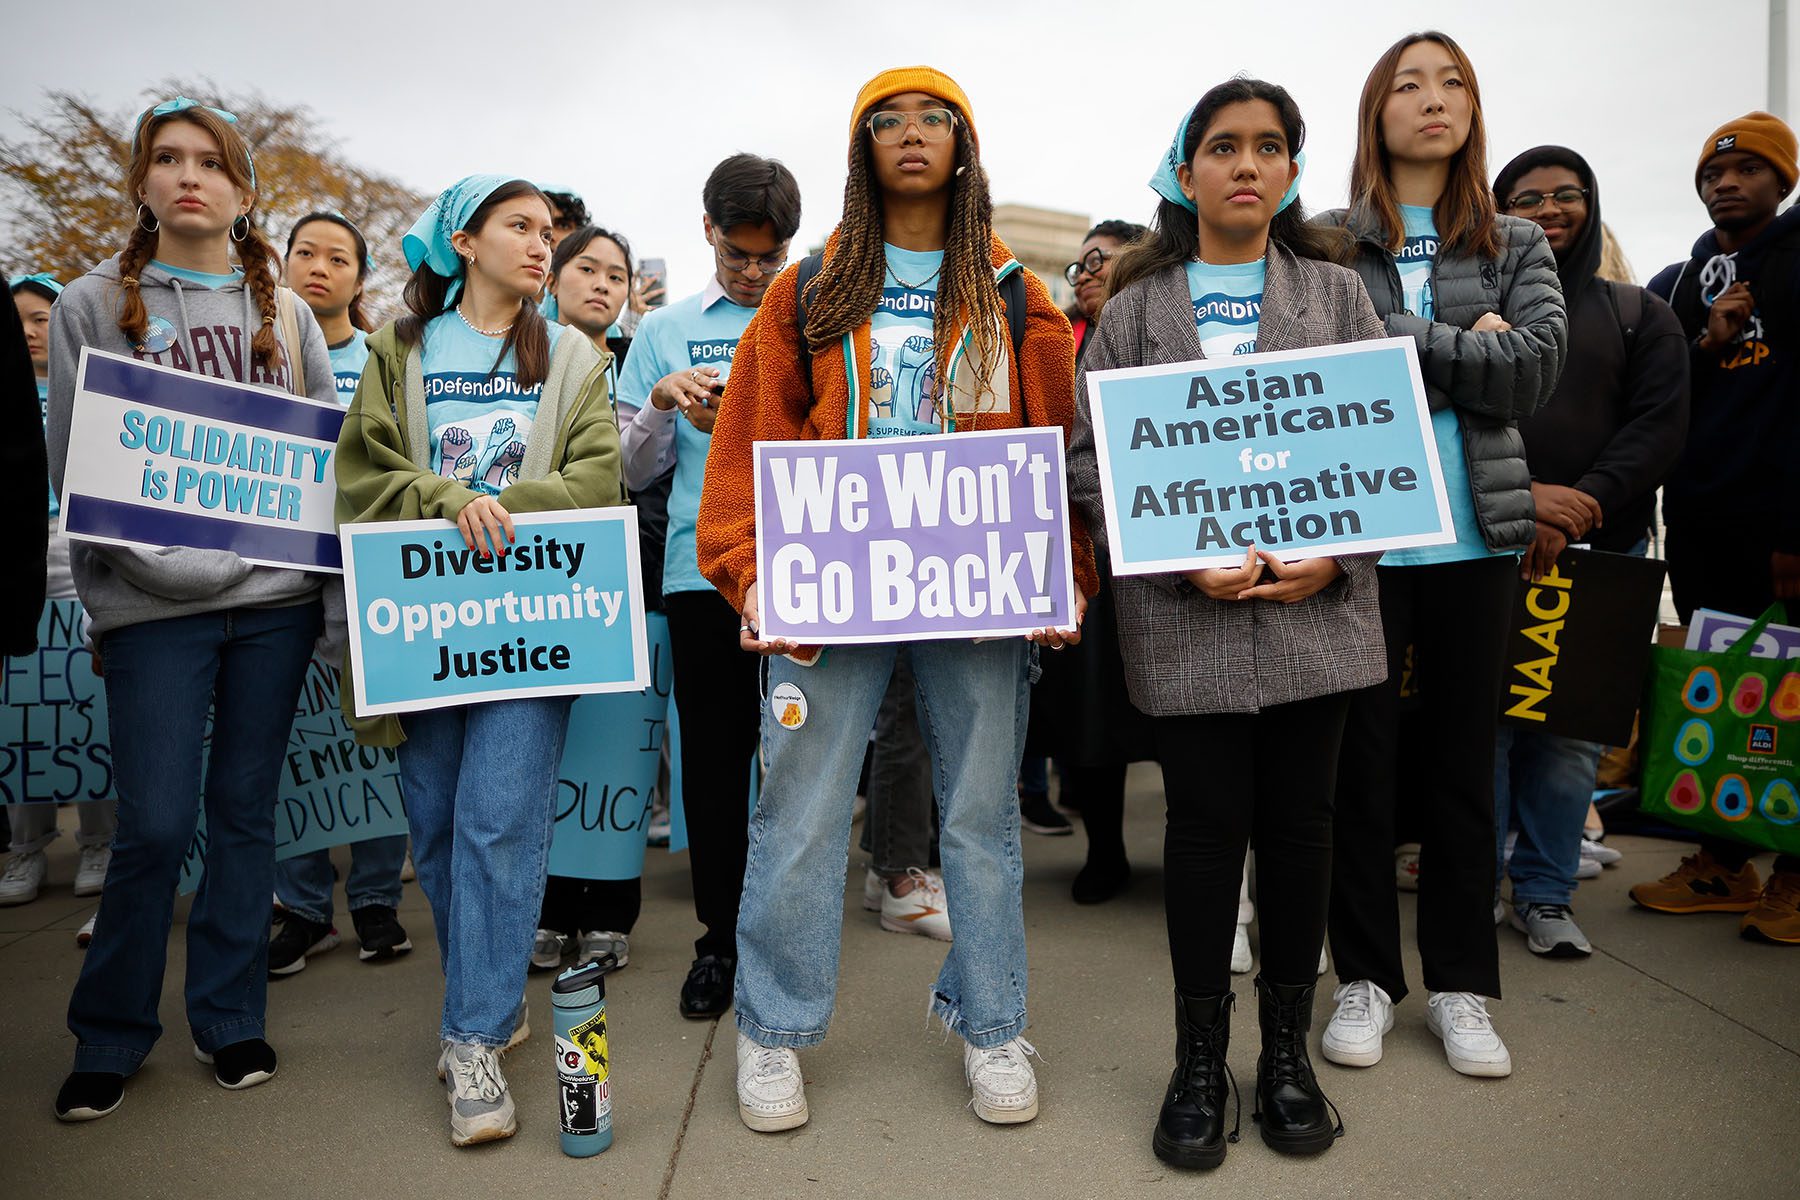 Proponents for affirmative action in higher education hold signs that read "we wont go back!" "Diversity, opportunity, justice," "Asian Americans for Affirmative Action," and "Solidarity is power" in front of the Supreme Court.